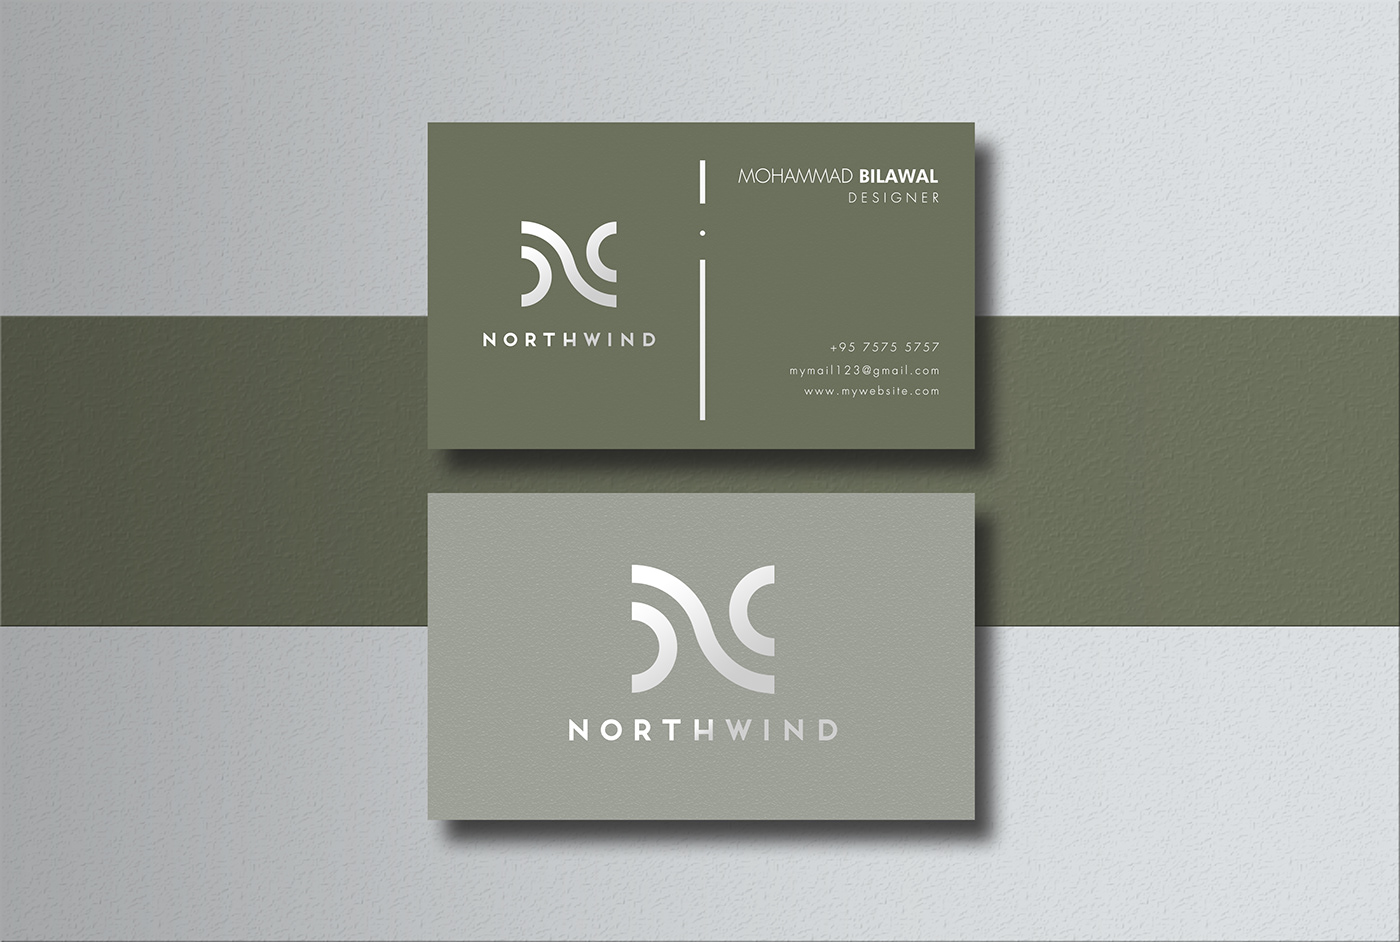 Luxury Business card mockup design with free psd file, modern business card mockup, logo mockup free